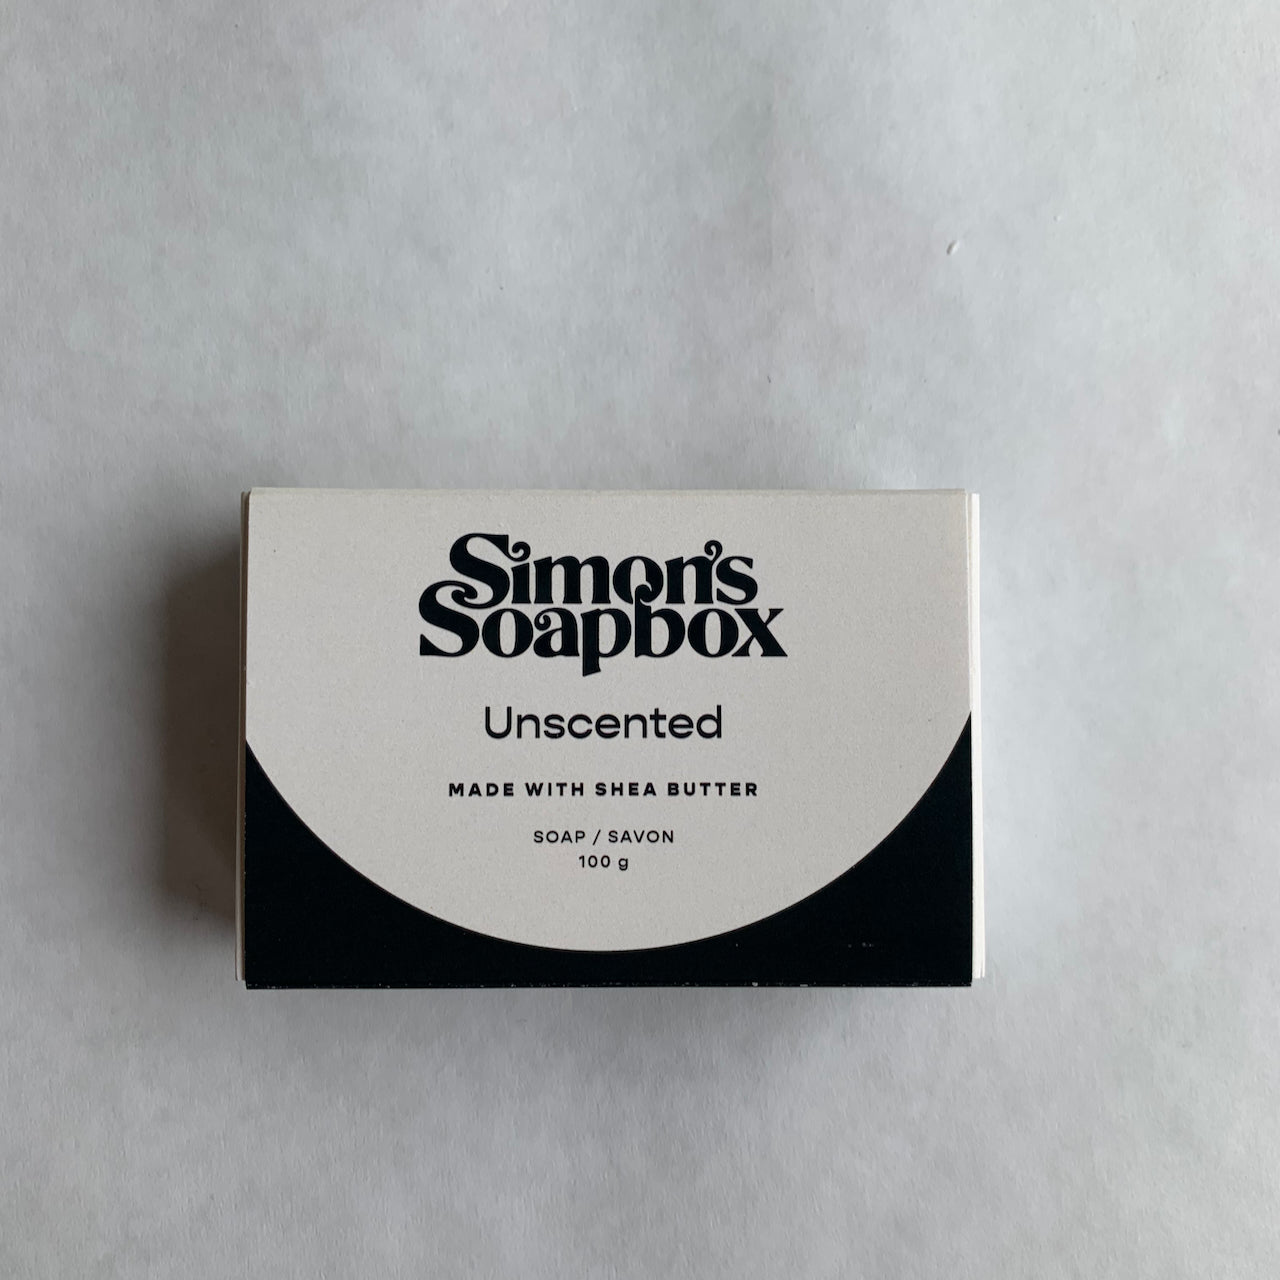 rectangle package, black and white with text Simon's Soapbox Unscented made with shea butter soap savon 100 g